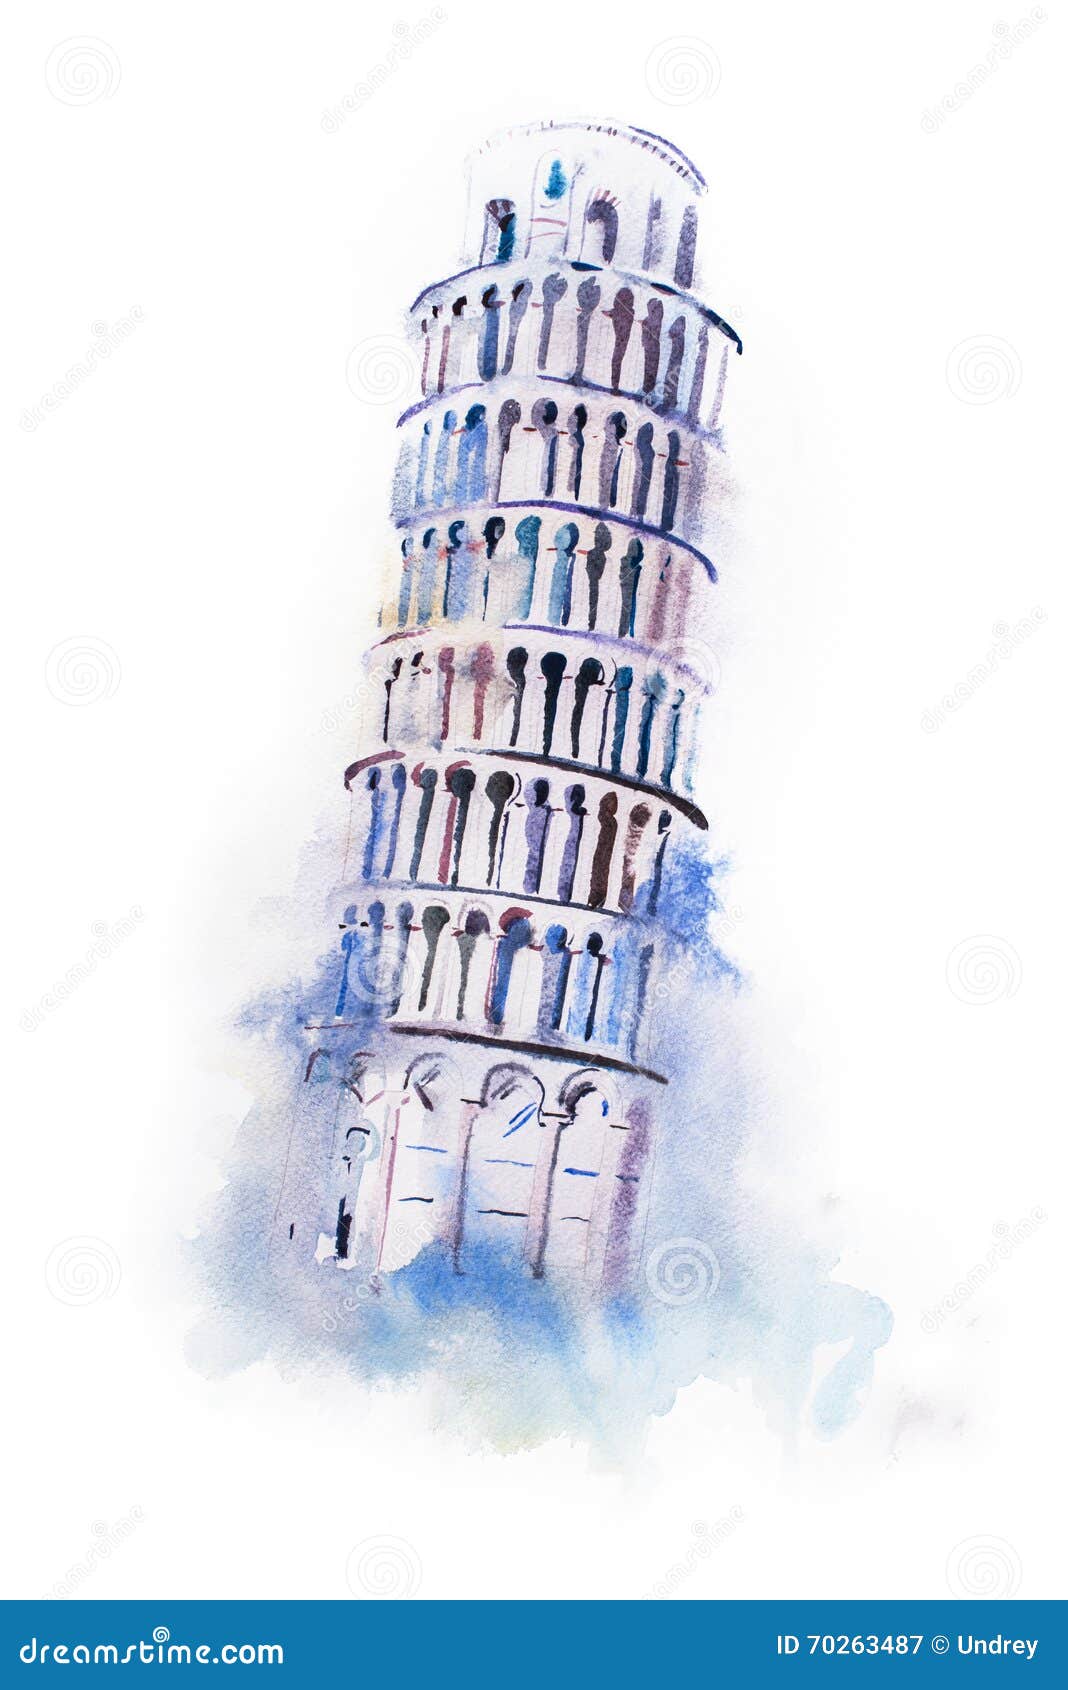 watercolor drawing leaning tower of pisa. aquarelle world wonder painting